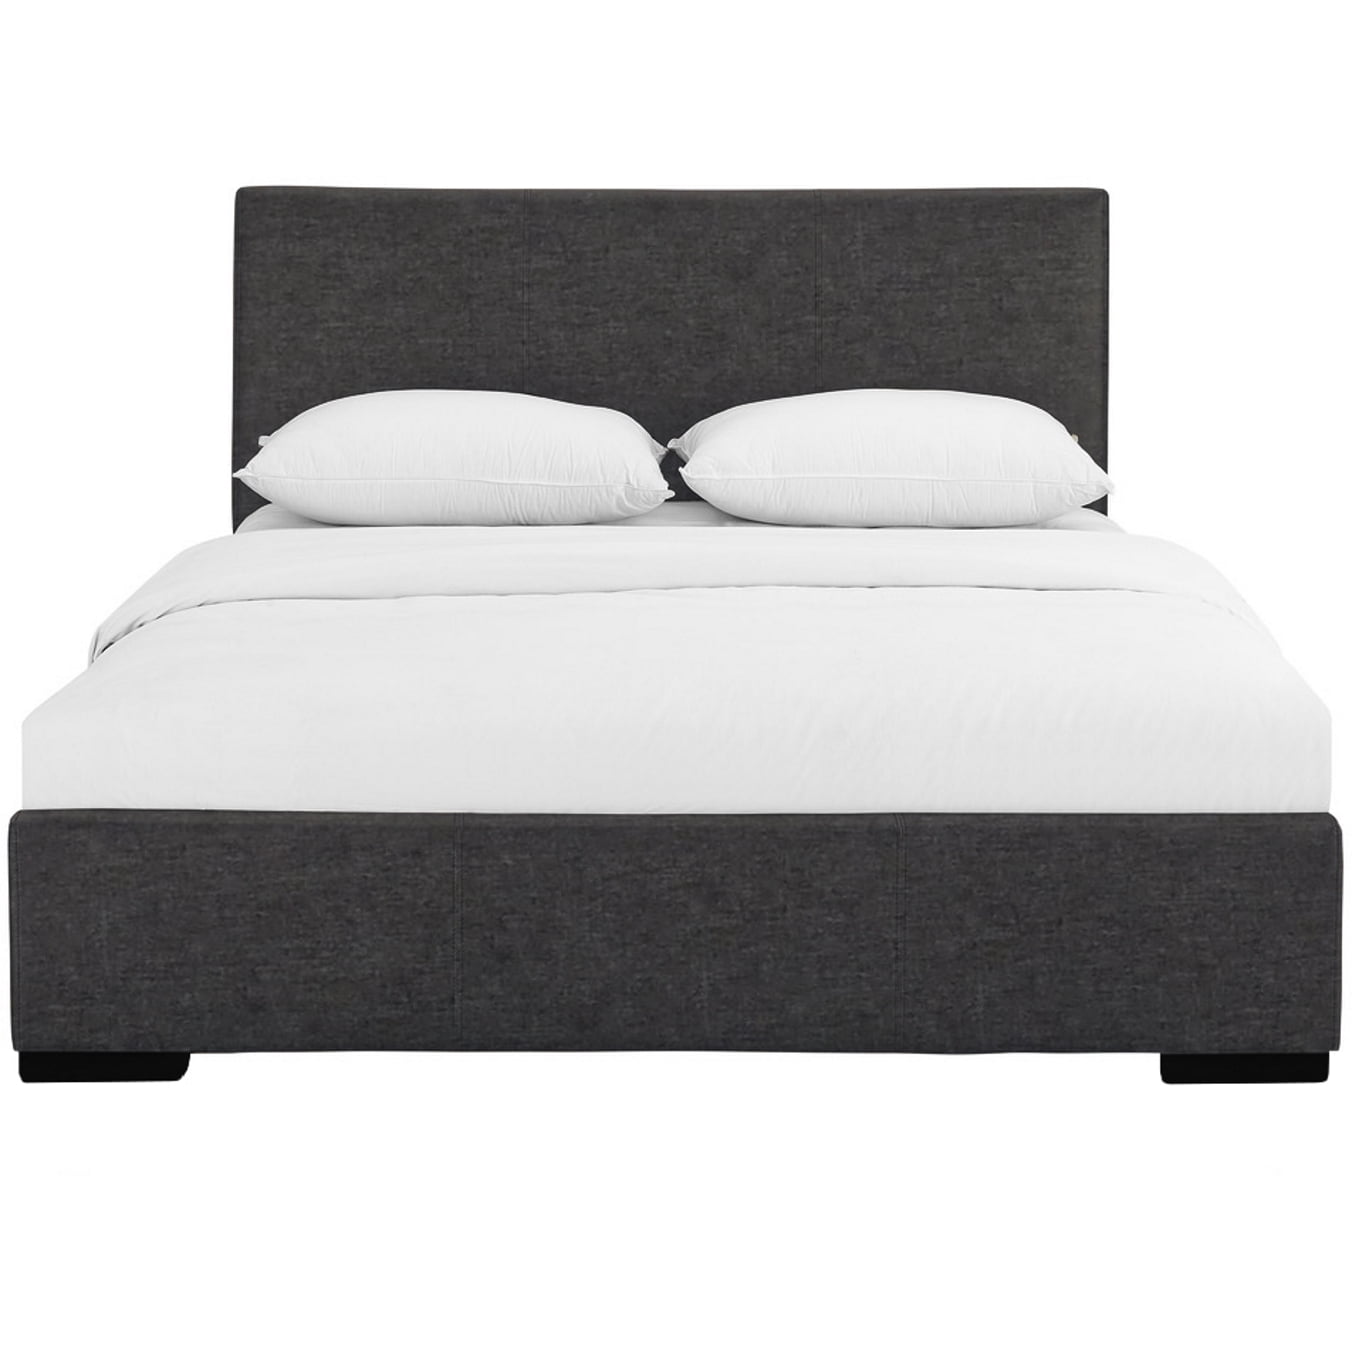 86342 In. Indes Upholstered Platform Bed, Grey, Queen Size - 85.4 X 63.4 X 34.8 In.